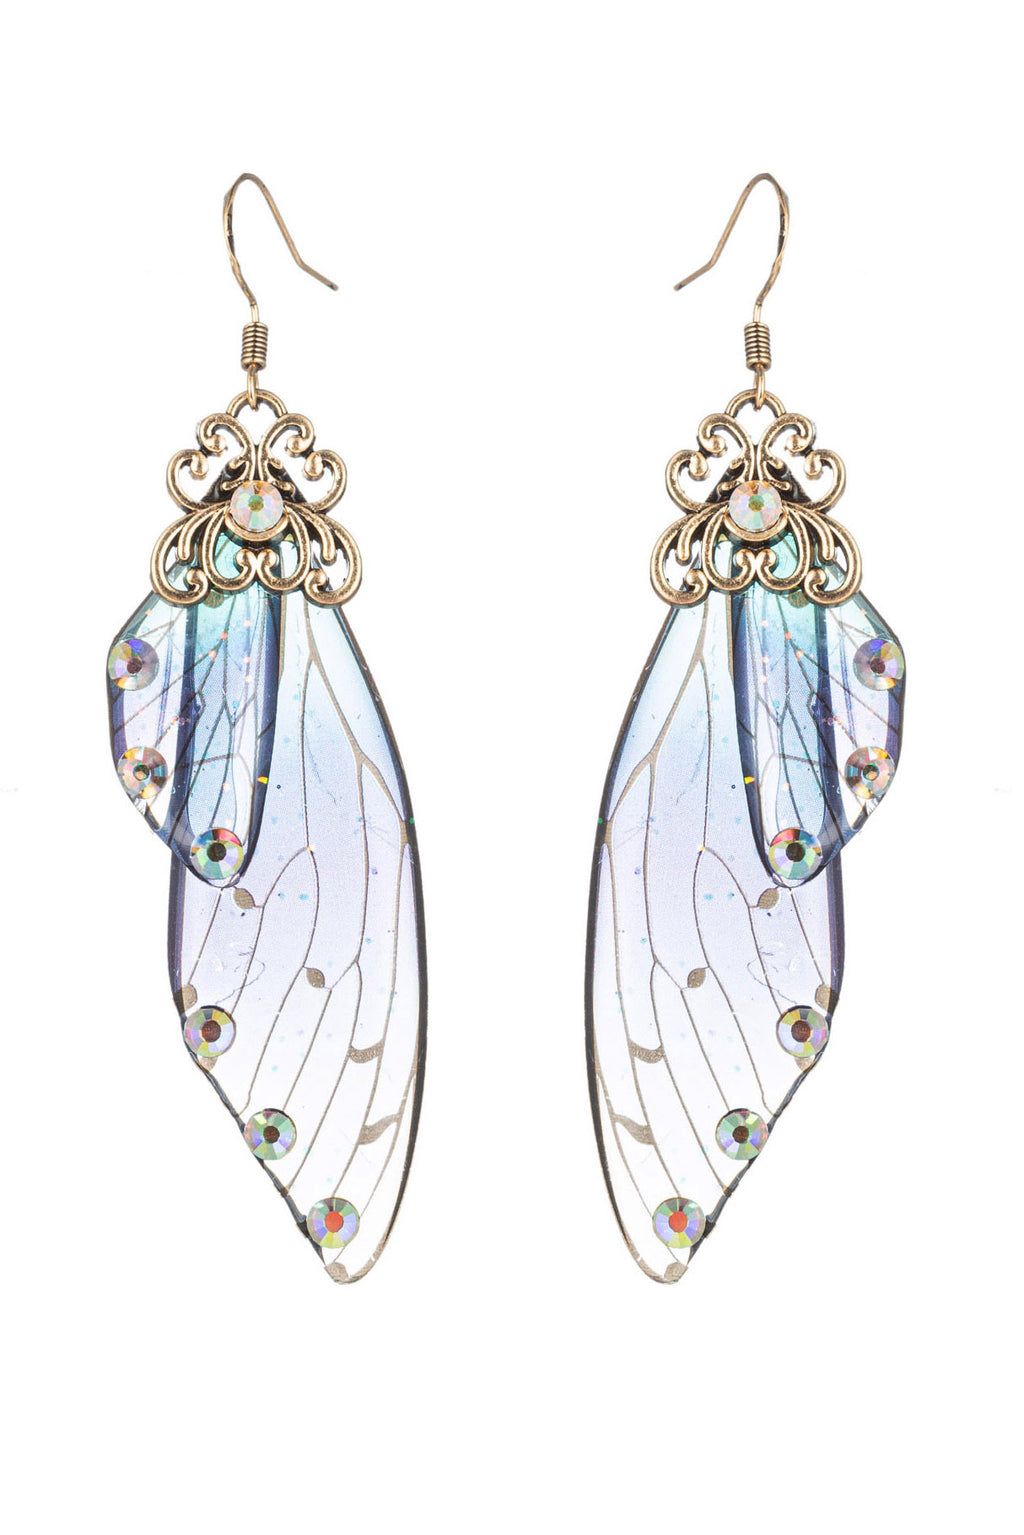 Fairy wing pendant drop earrings studded with glass crystals.